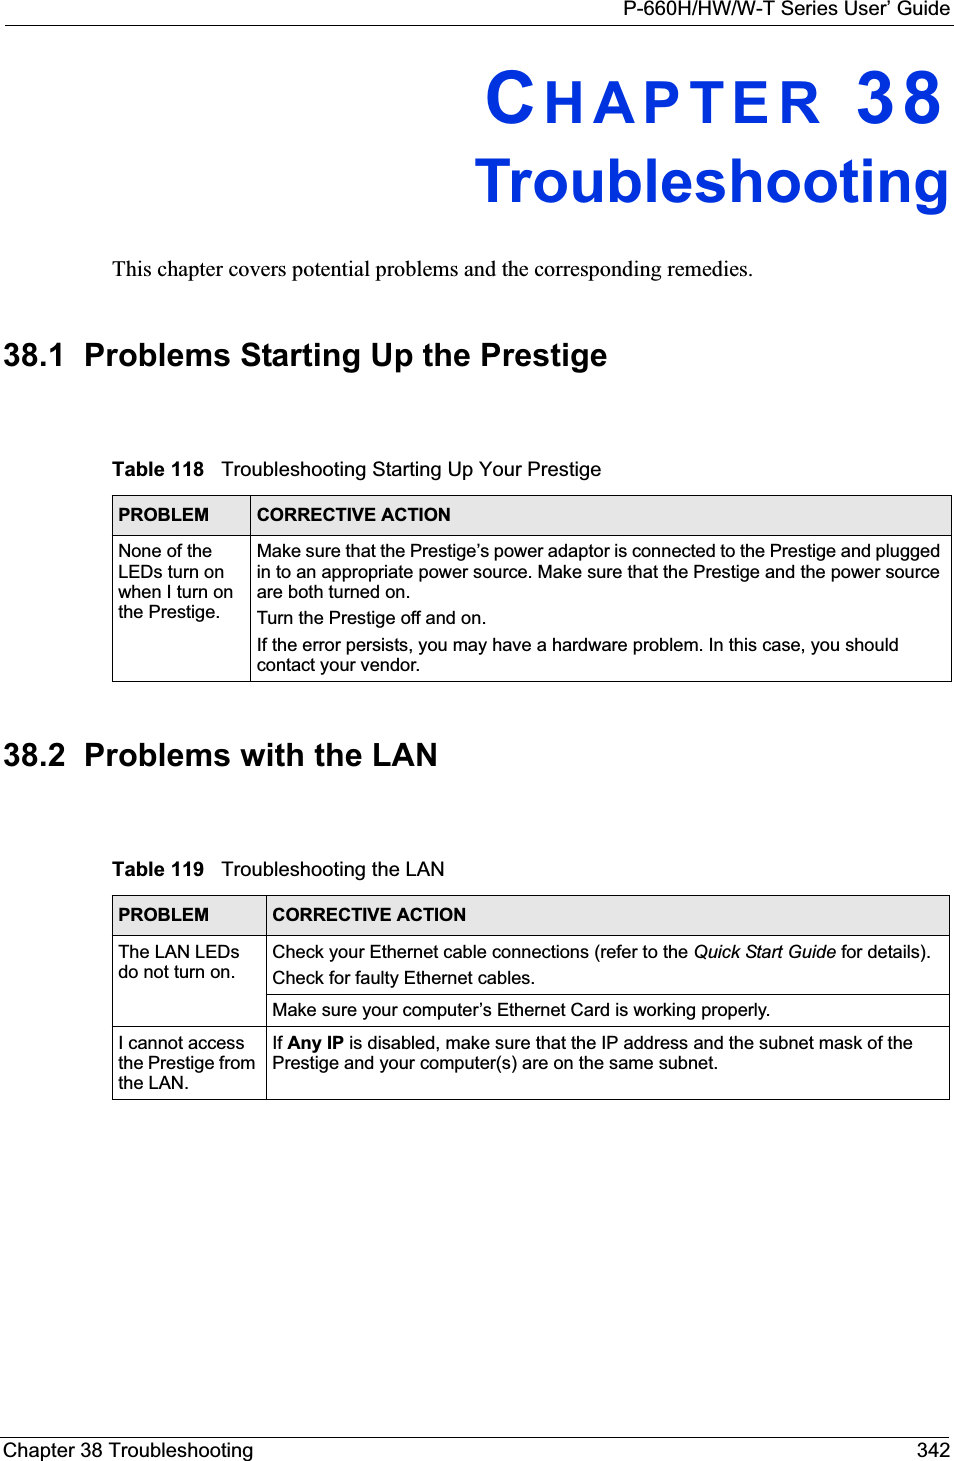 P-660H/HW/W-T Series User’ GuideChapter 38 Troubleshooting 342CHAPTER 38TroubleshootingThis chapter covers potential problems and the corresponding remedies.38.1  Problems Starting Up the Prestige38.2  Problems with the LANTable 118   Troubleshooting Starting Up Your PrestigePROBLEM CORRECTIVE ACTIONNone of the LEDs turn on when I turn on the Prestige.Make sure that the Prestige’s power adaptor is connected to the Prestige and plugged in to an appropriate power source. Make sure that the Prestige and the power source are both turned on.Turn the Prestige off and on.If the error persists, you may have a hardware problem. In this case, you should contact your vendor.Table 119   Troubleshooting the LANPROBLEM CORRECTIVE ACTIONThe LAN LEDs do not turn on.Check your Ethernet cable connections (refer to the Quick Start Guide for details). Check for faulty Ethernet cables.Make sure your computer’s Ethernet Card is working properly.I cannot access the Prestige from the LAN. If Any IP is disabled, make sure that the IP address and the subnet mask of the Prestige and your computer(s) are on the same subnet.